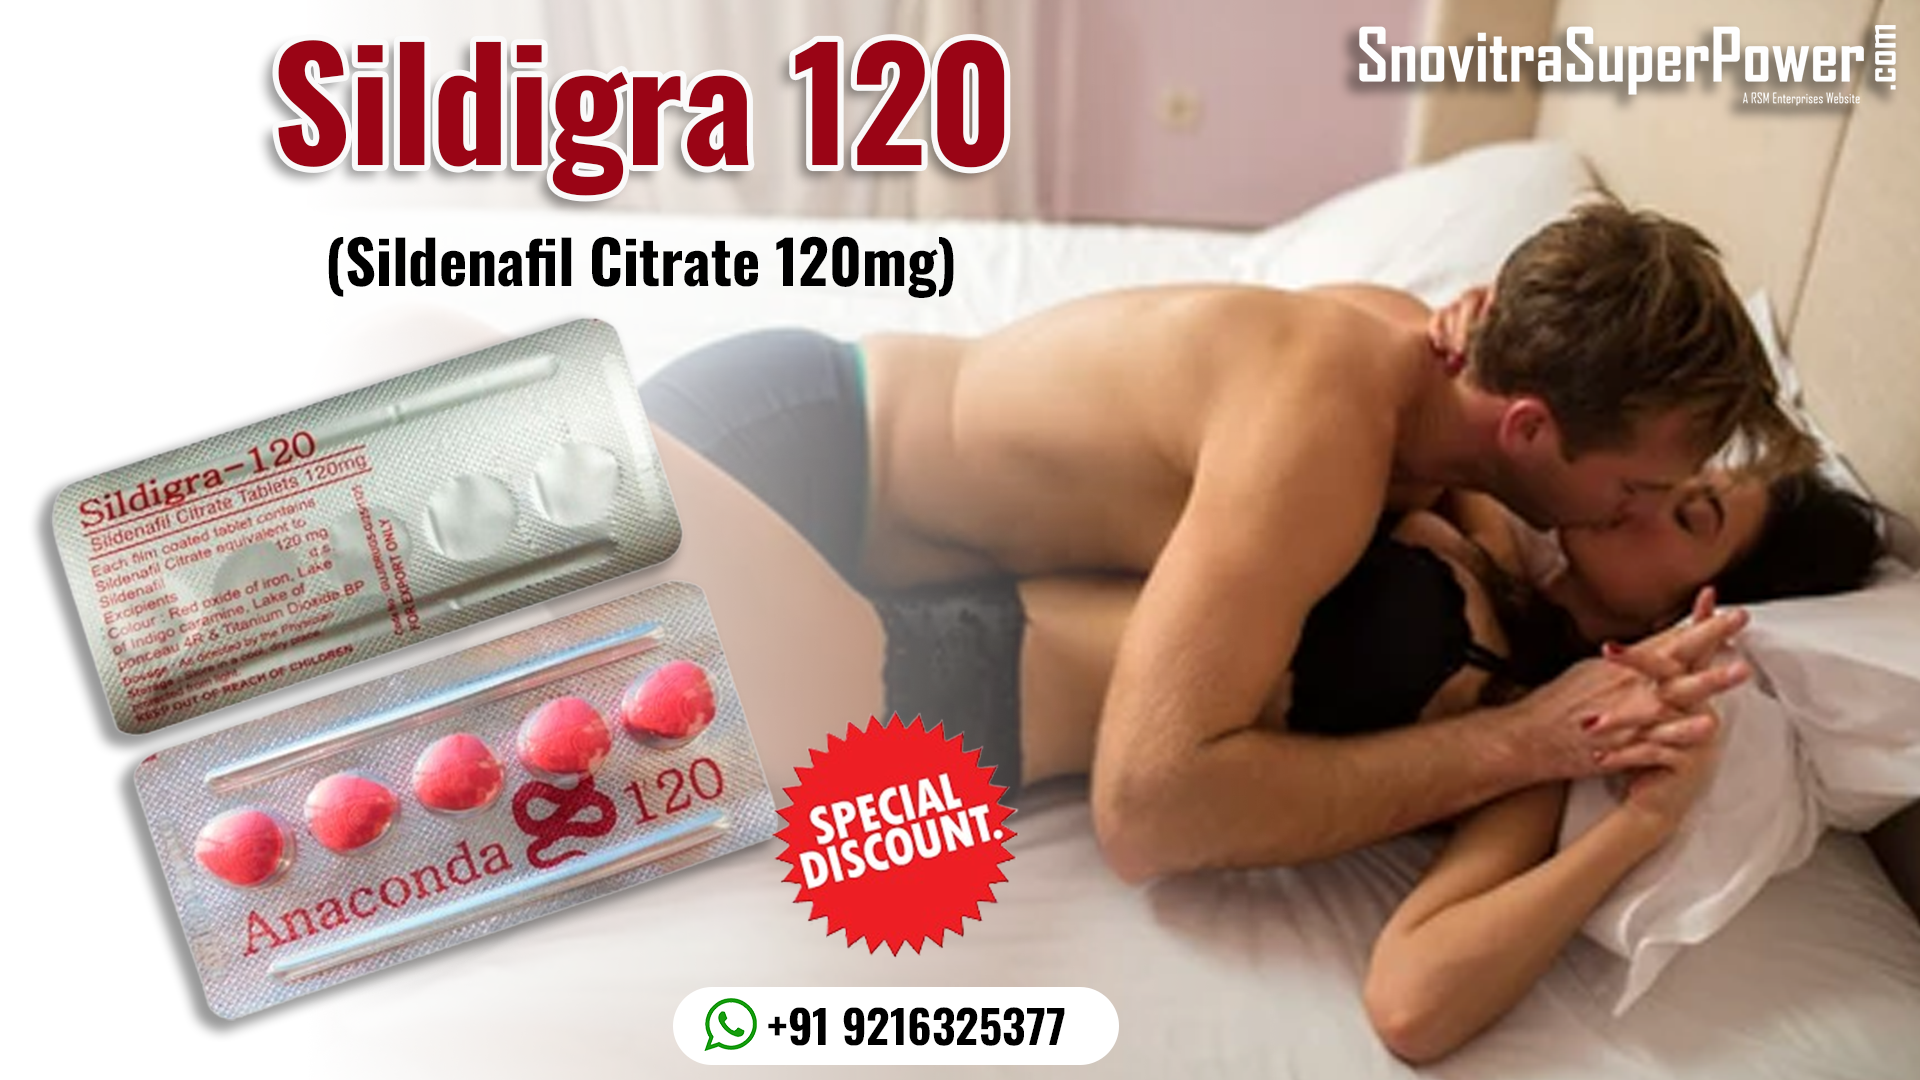 Sildigra 120: An Oral Medication Designed to Fix Sensual Performance